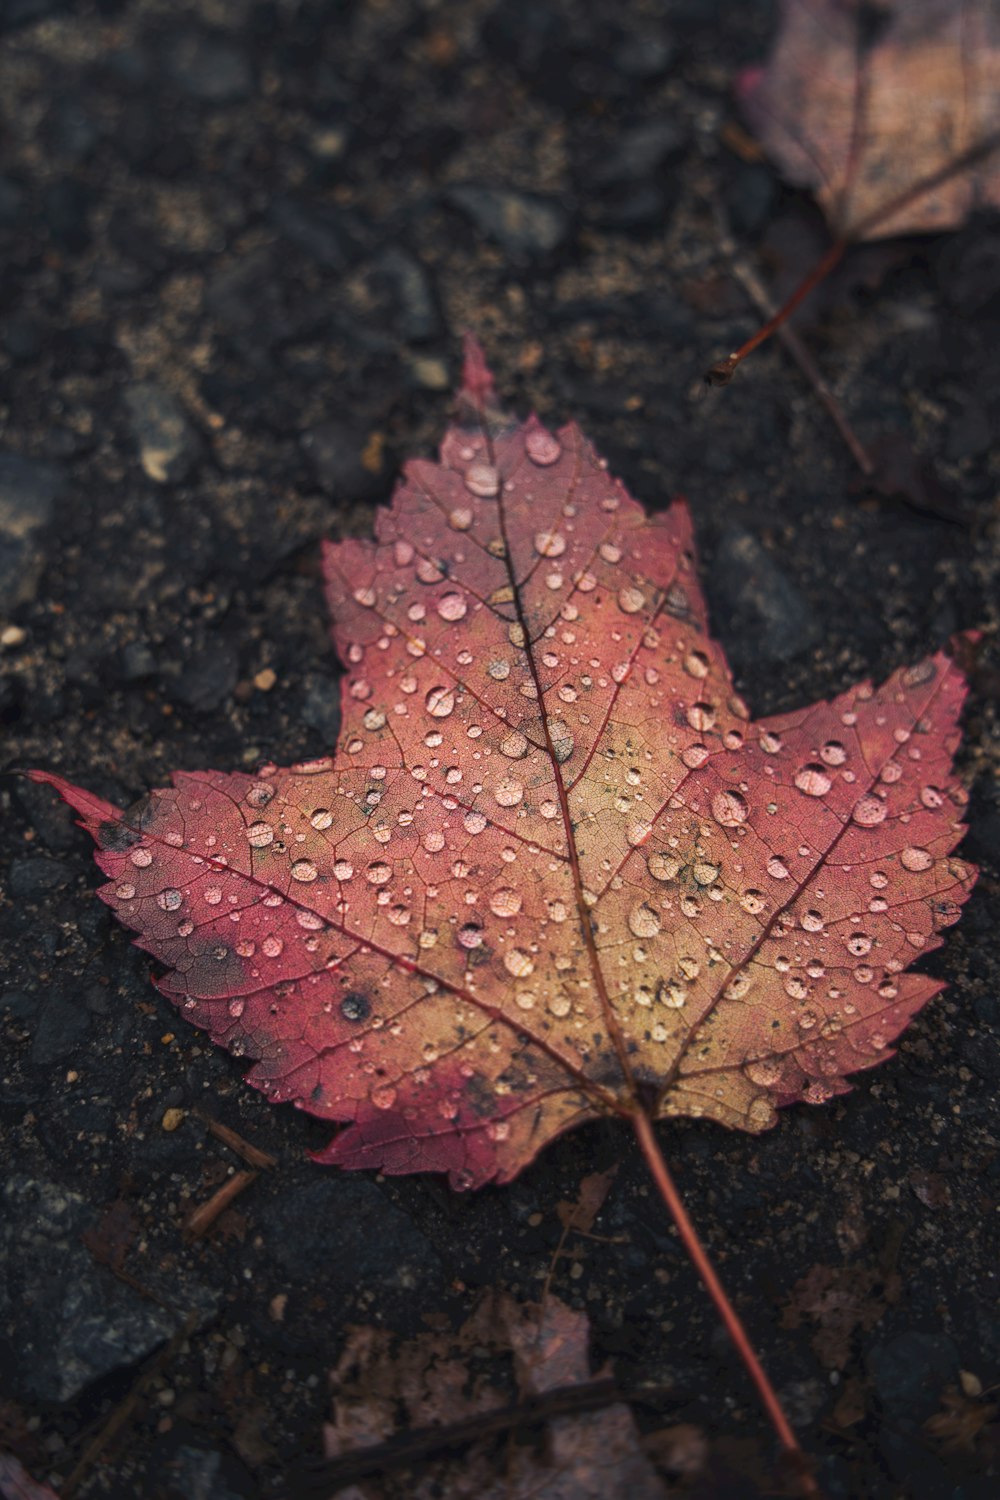 a leaf with water droplets on it laying on the ground